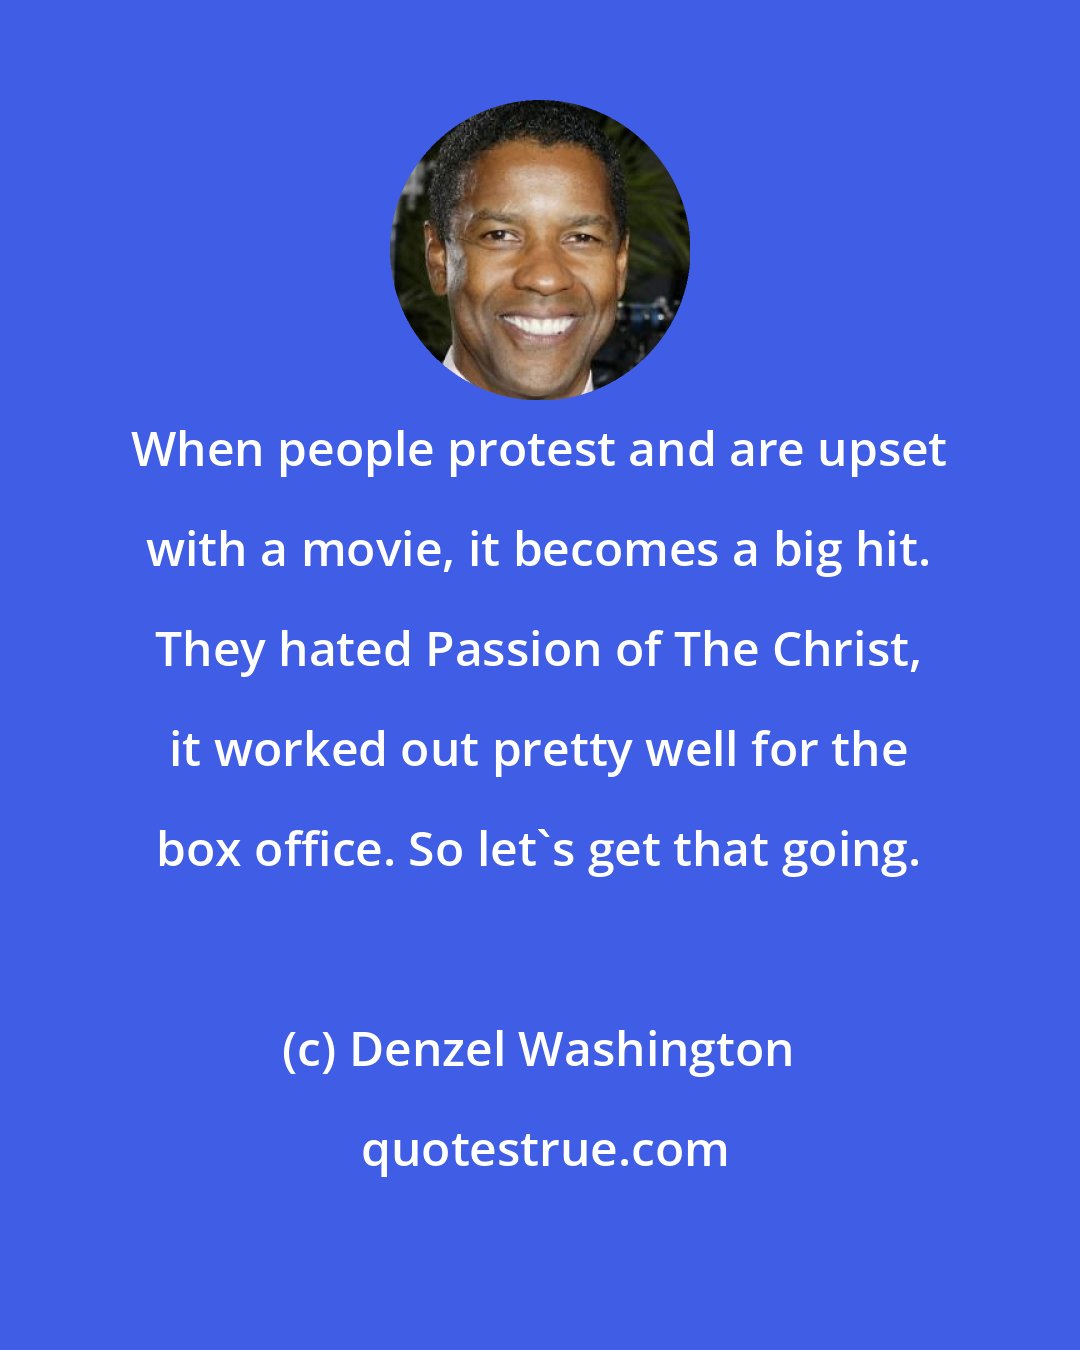 Denzel Washington: When people protest and are upset with a movie, it becomes a big hit. They hated Passion of The Christ, it worked out pretty well for the box office. So let's get that going.